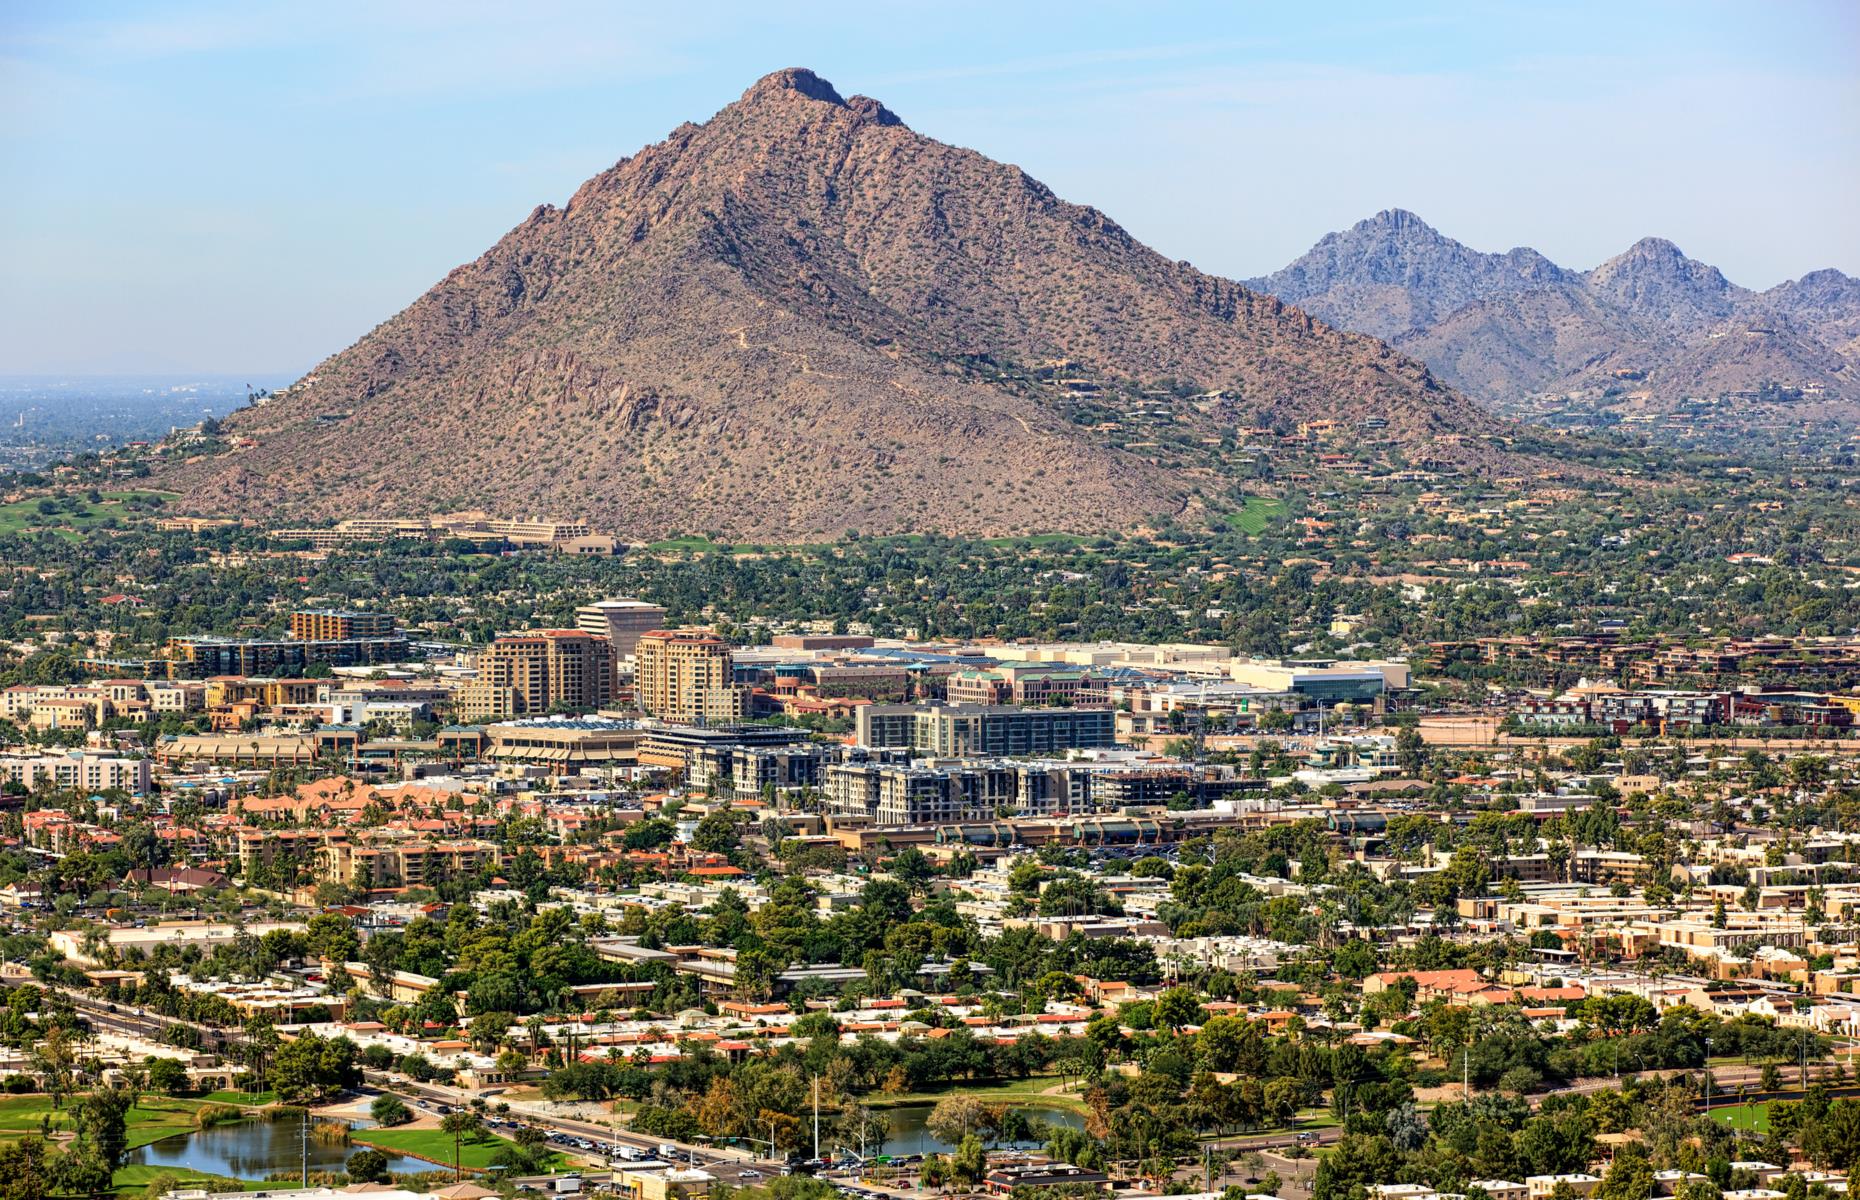 <p>Summer in Scottsdale stretches all the way from May until mid-September. Temperatures during these months <a href="https://www.experiencescottsdale.com/weather/">can soar to a sweltering 106°F (41°C)</a>, so the city is generally best avoided at these times. Book a shoulder-season trip to the Sonoran Desert city though, and it’s pretty perfect. The mercury still tends to hit 68°F (20°C) and above, which makes shopping, dining in the Old Town and hiking on mountain trails much more enjoyable.</p>